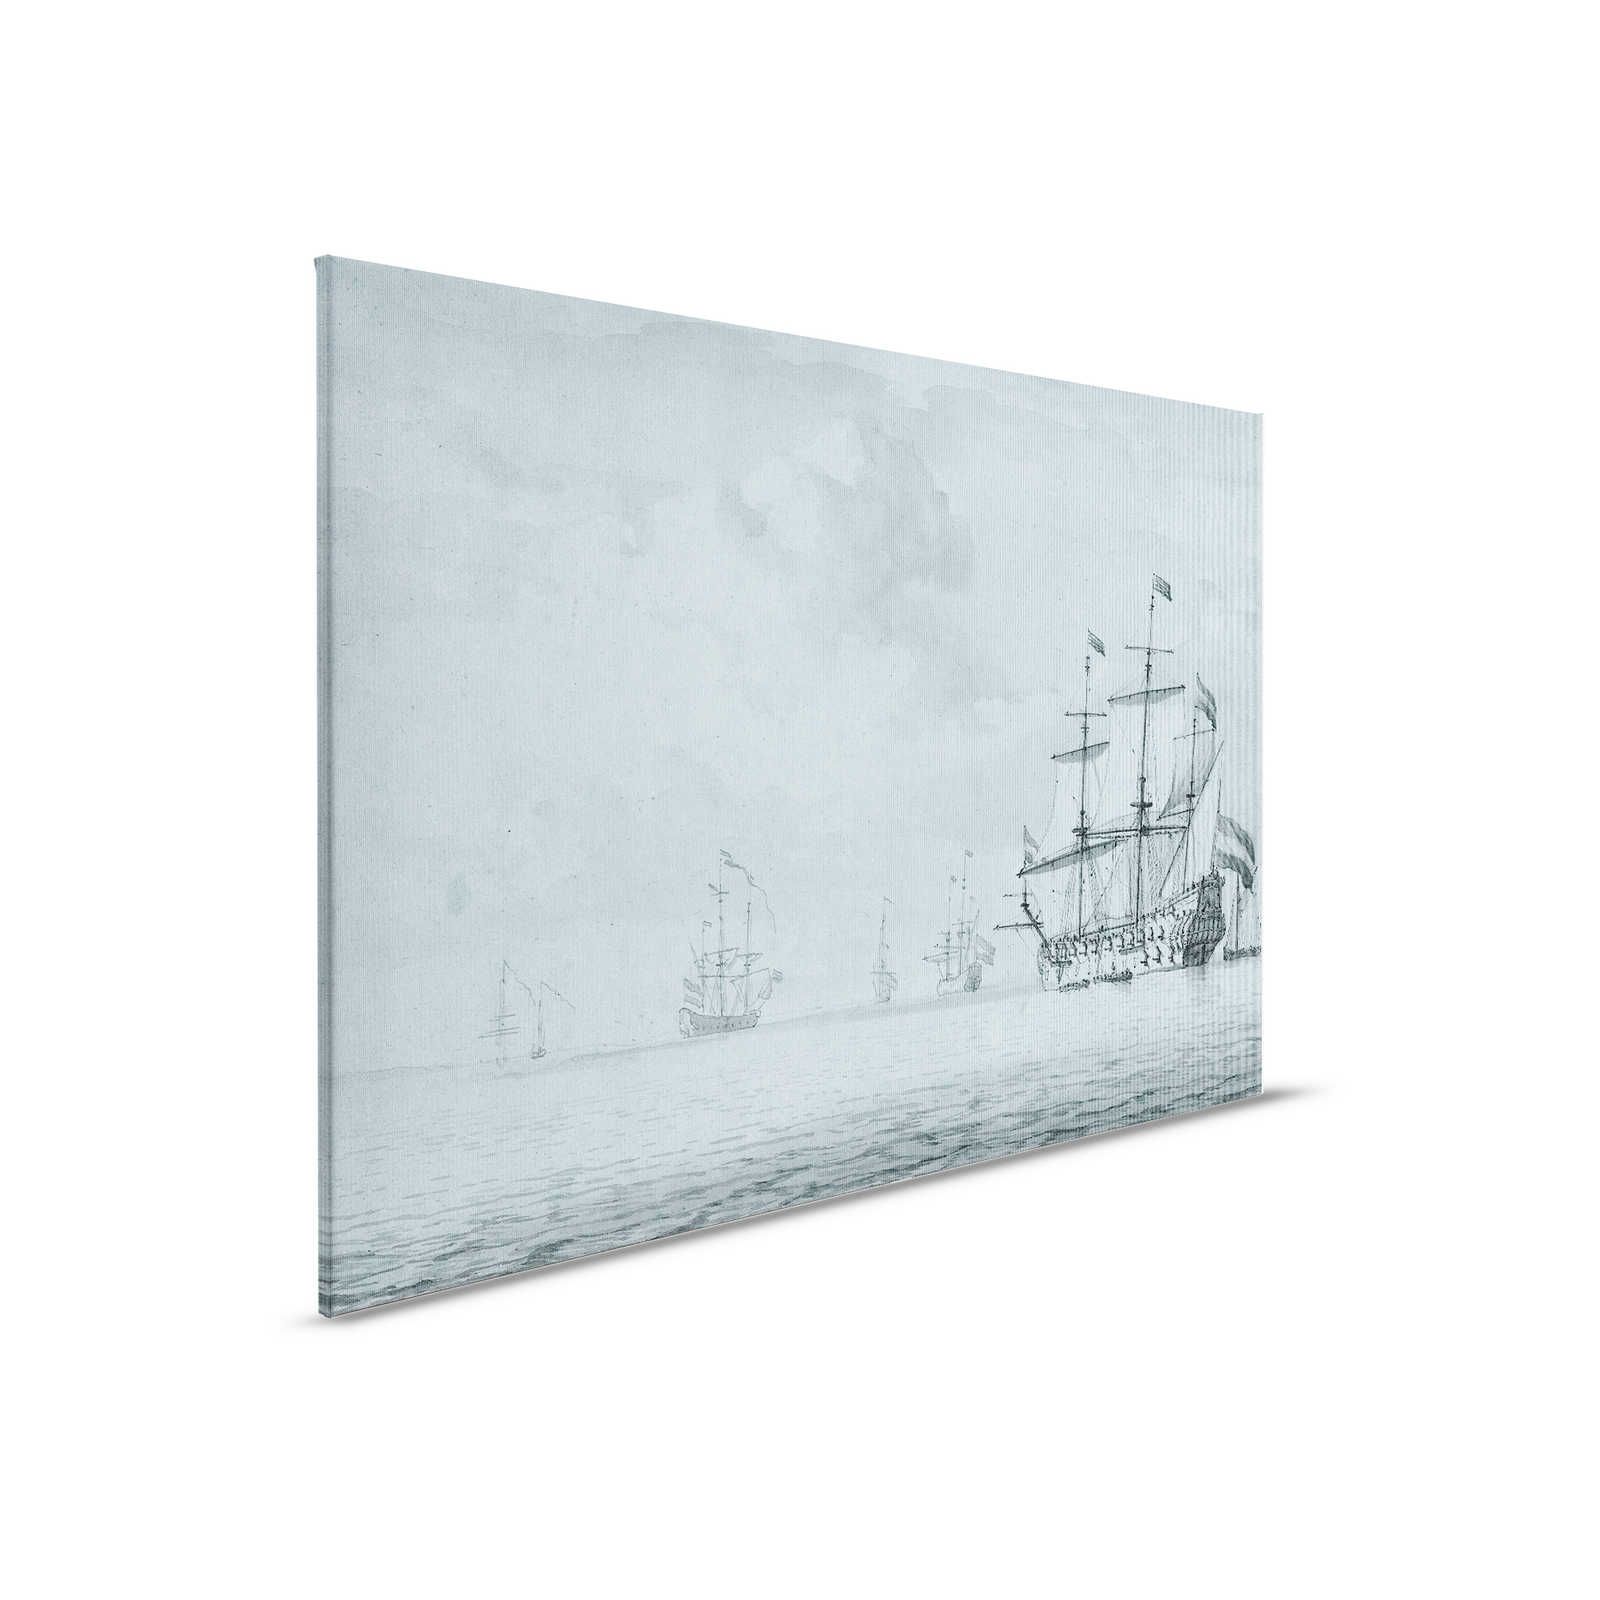         On the Sea 1 - Grey Blue Canvas painting Ships Vintage Painting Style - 0.90 m x 0.60 m
    